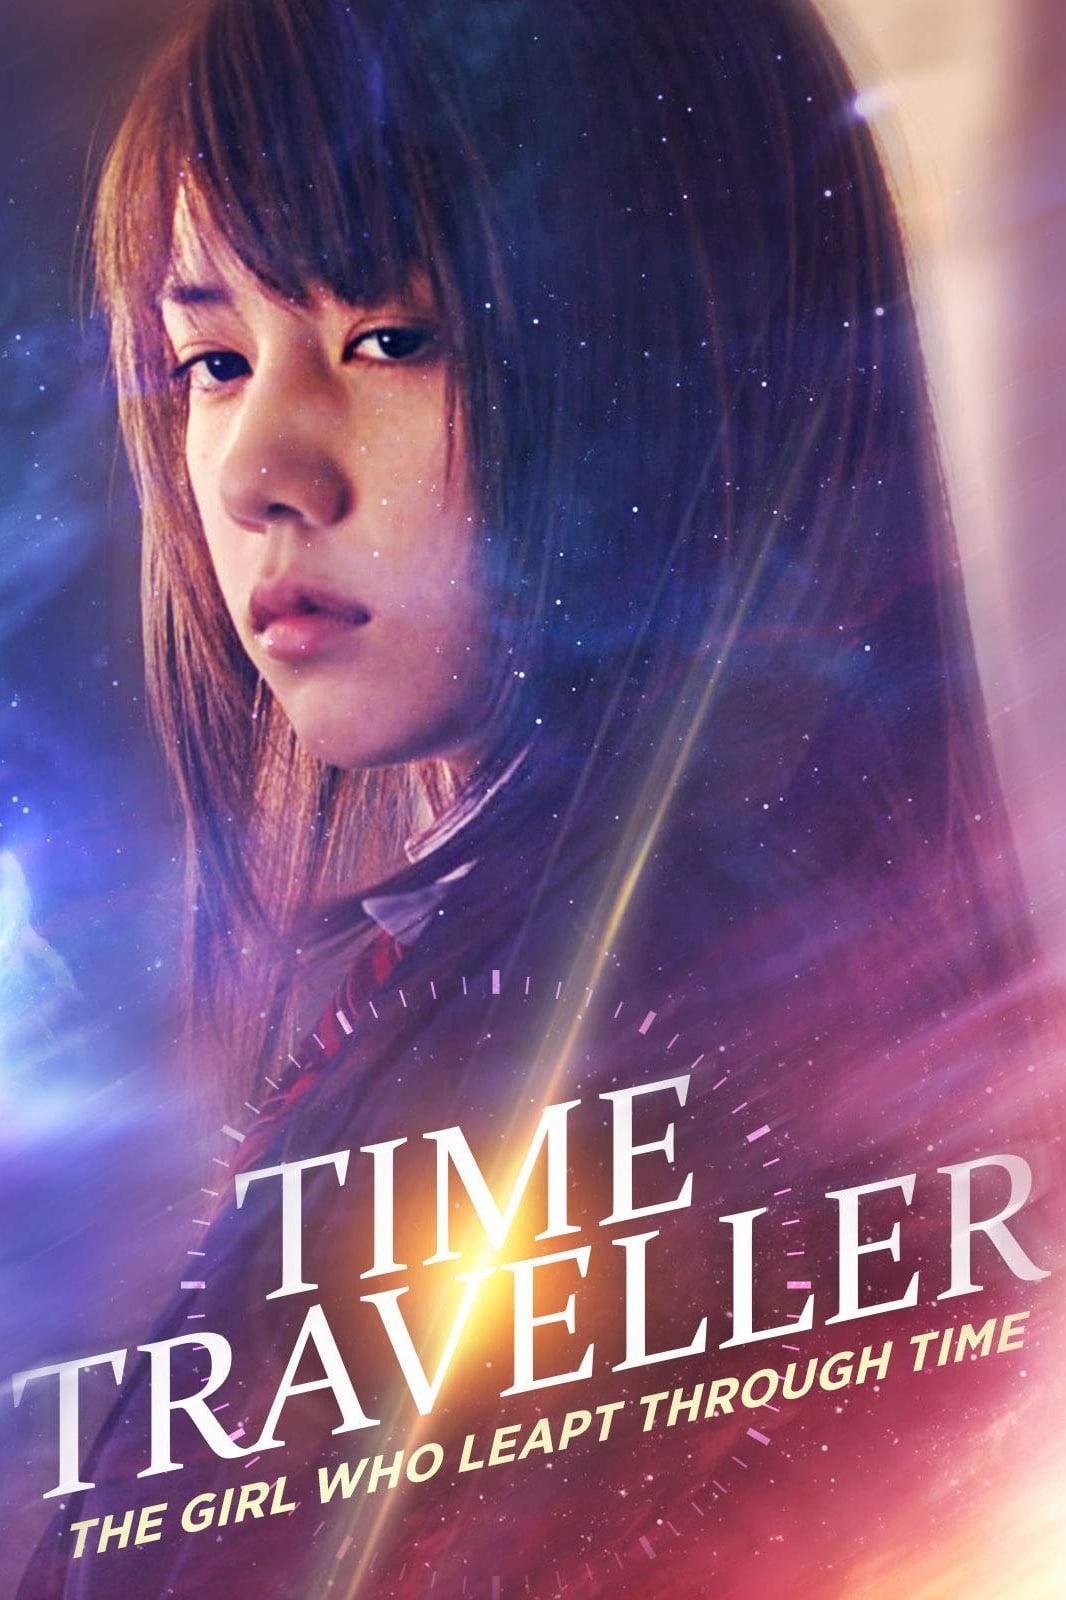 Time Traveller: The Girl Who Leapt Through Time poster